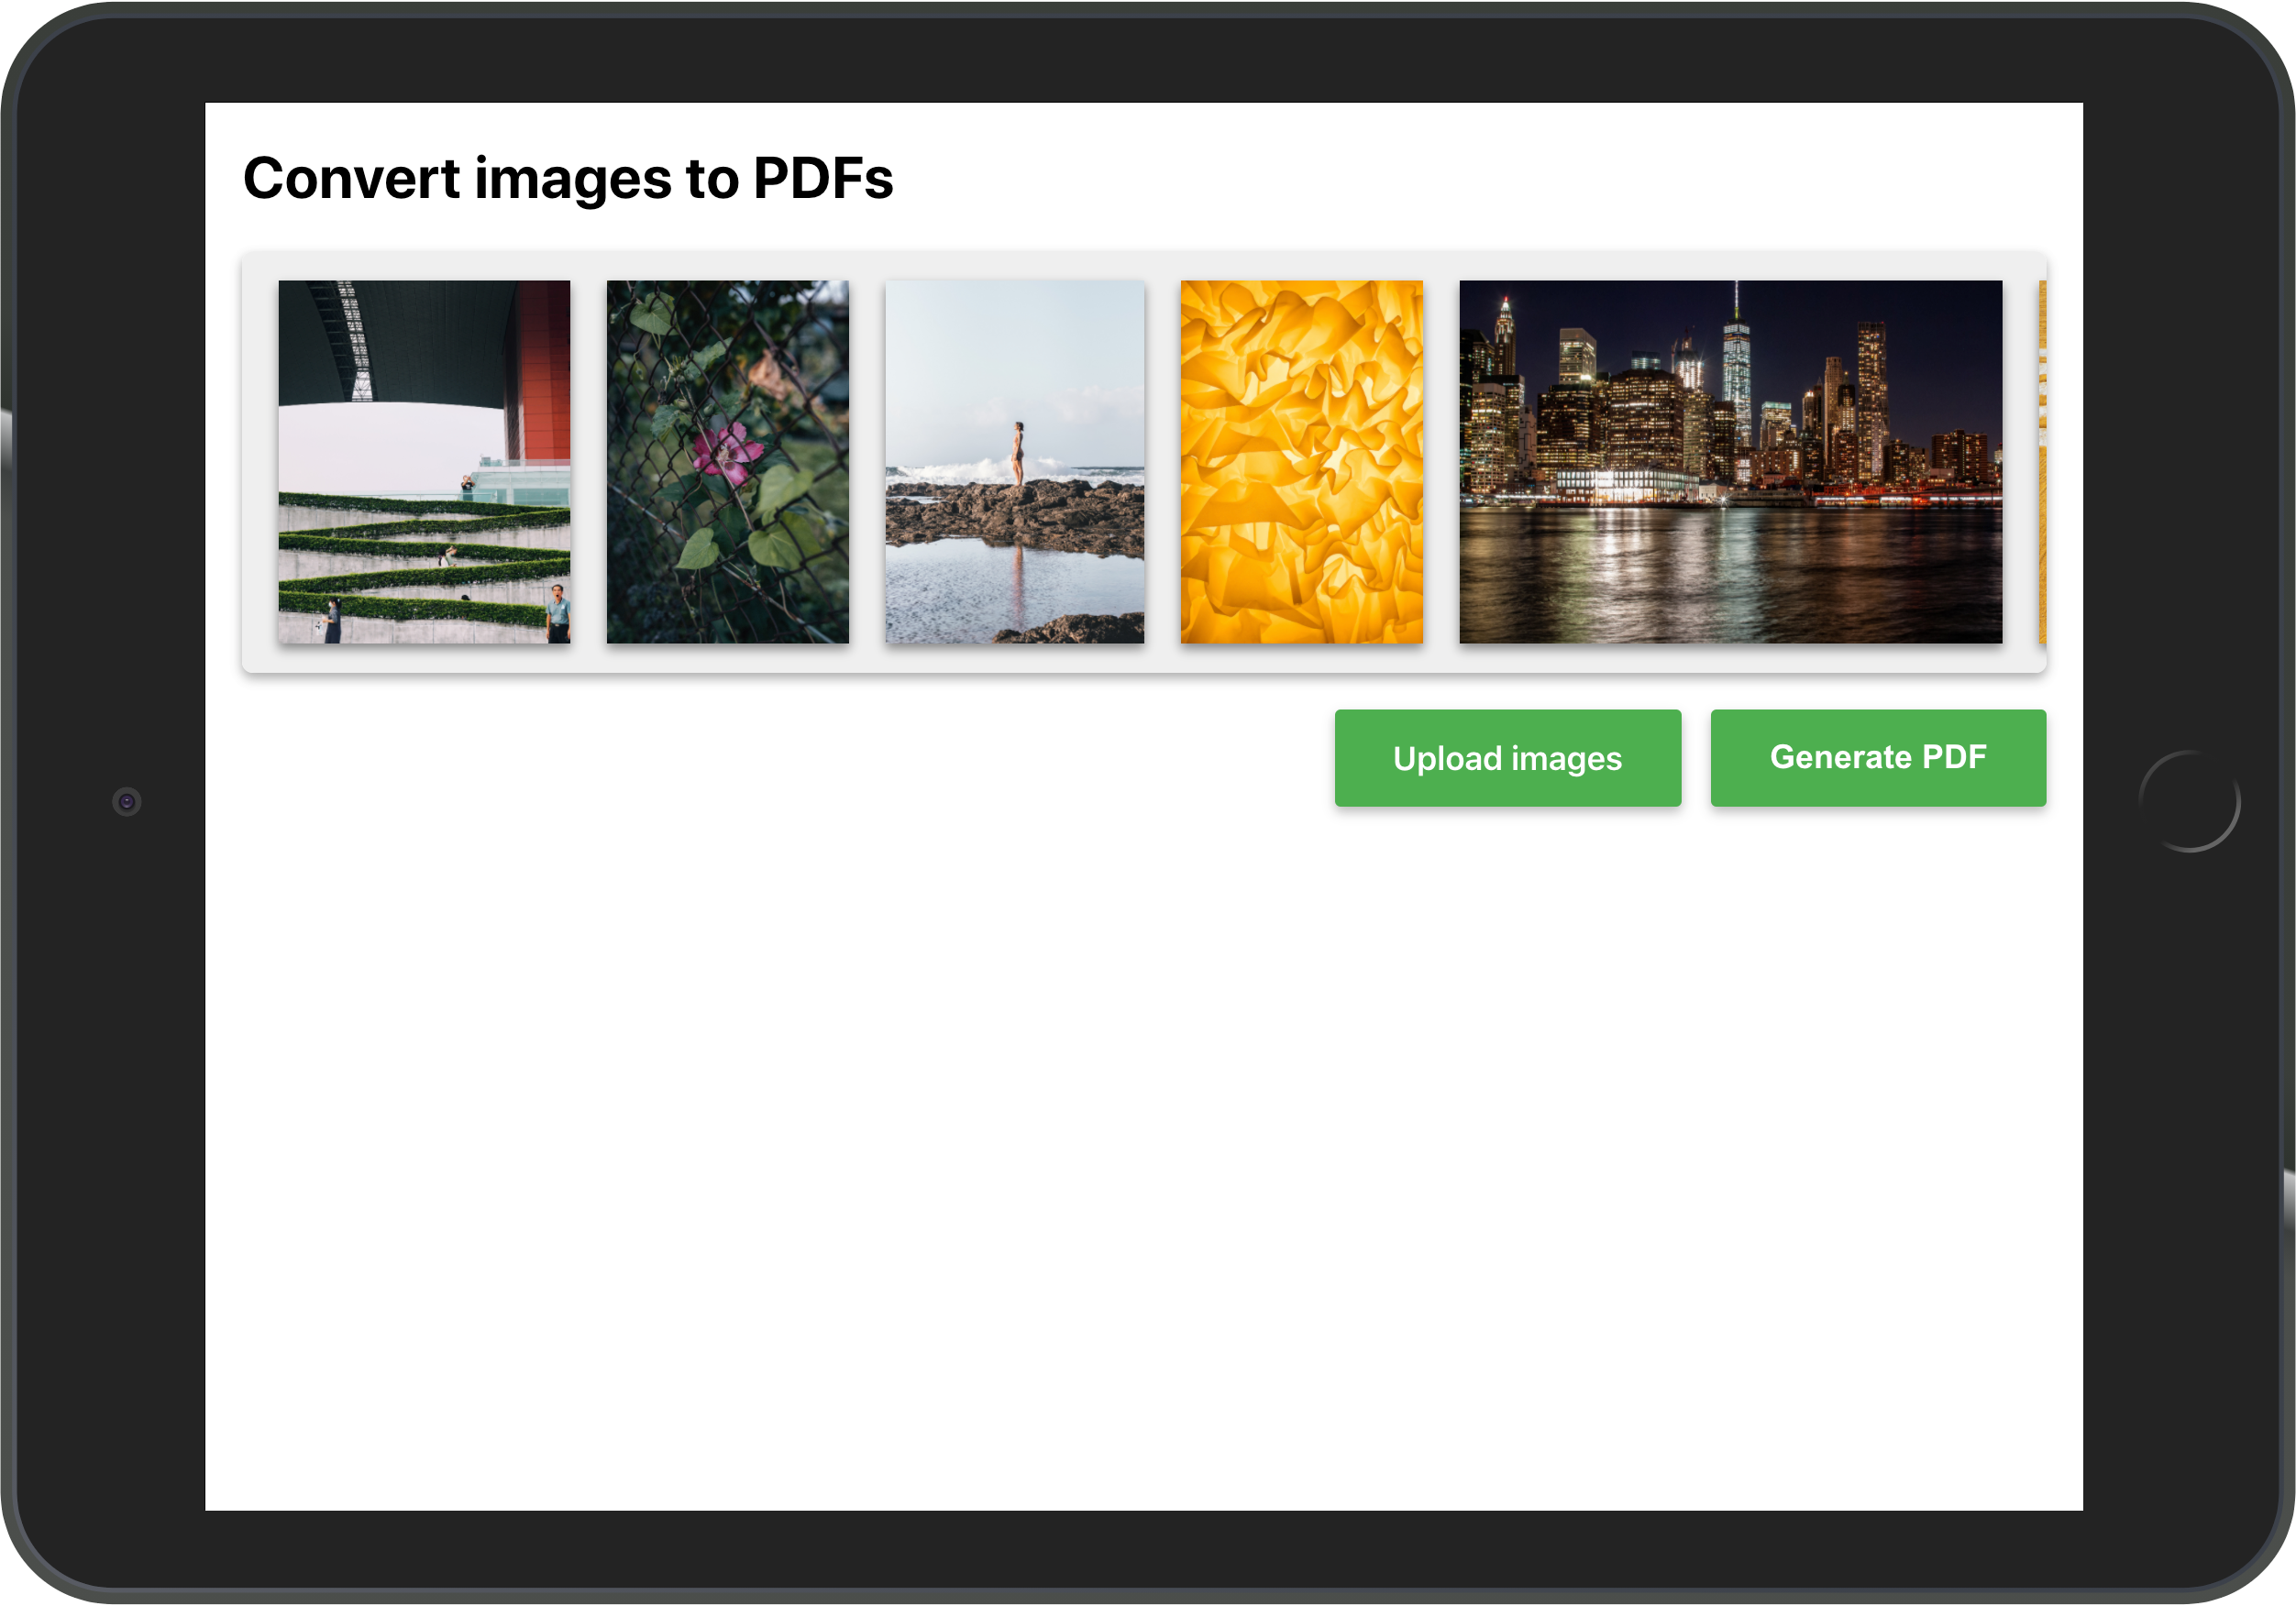 React app for generating PDFs from images